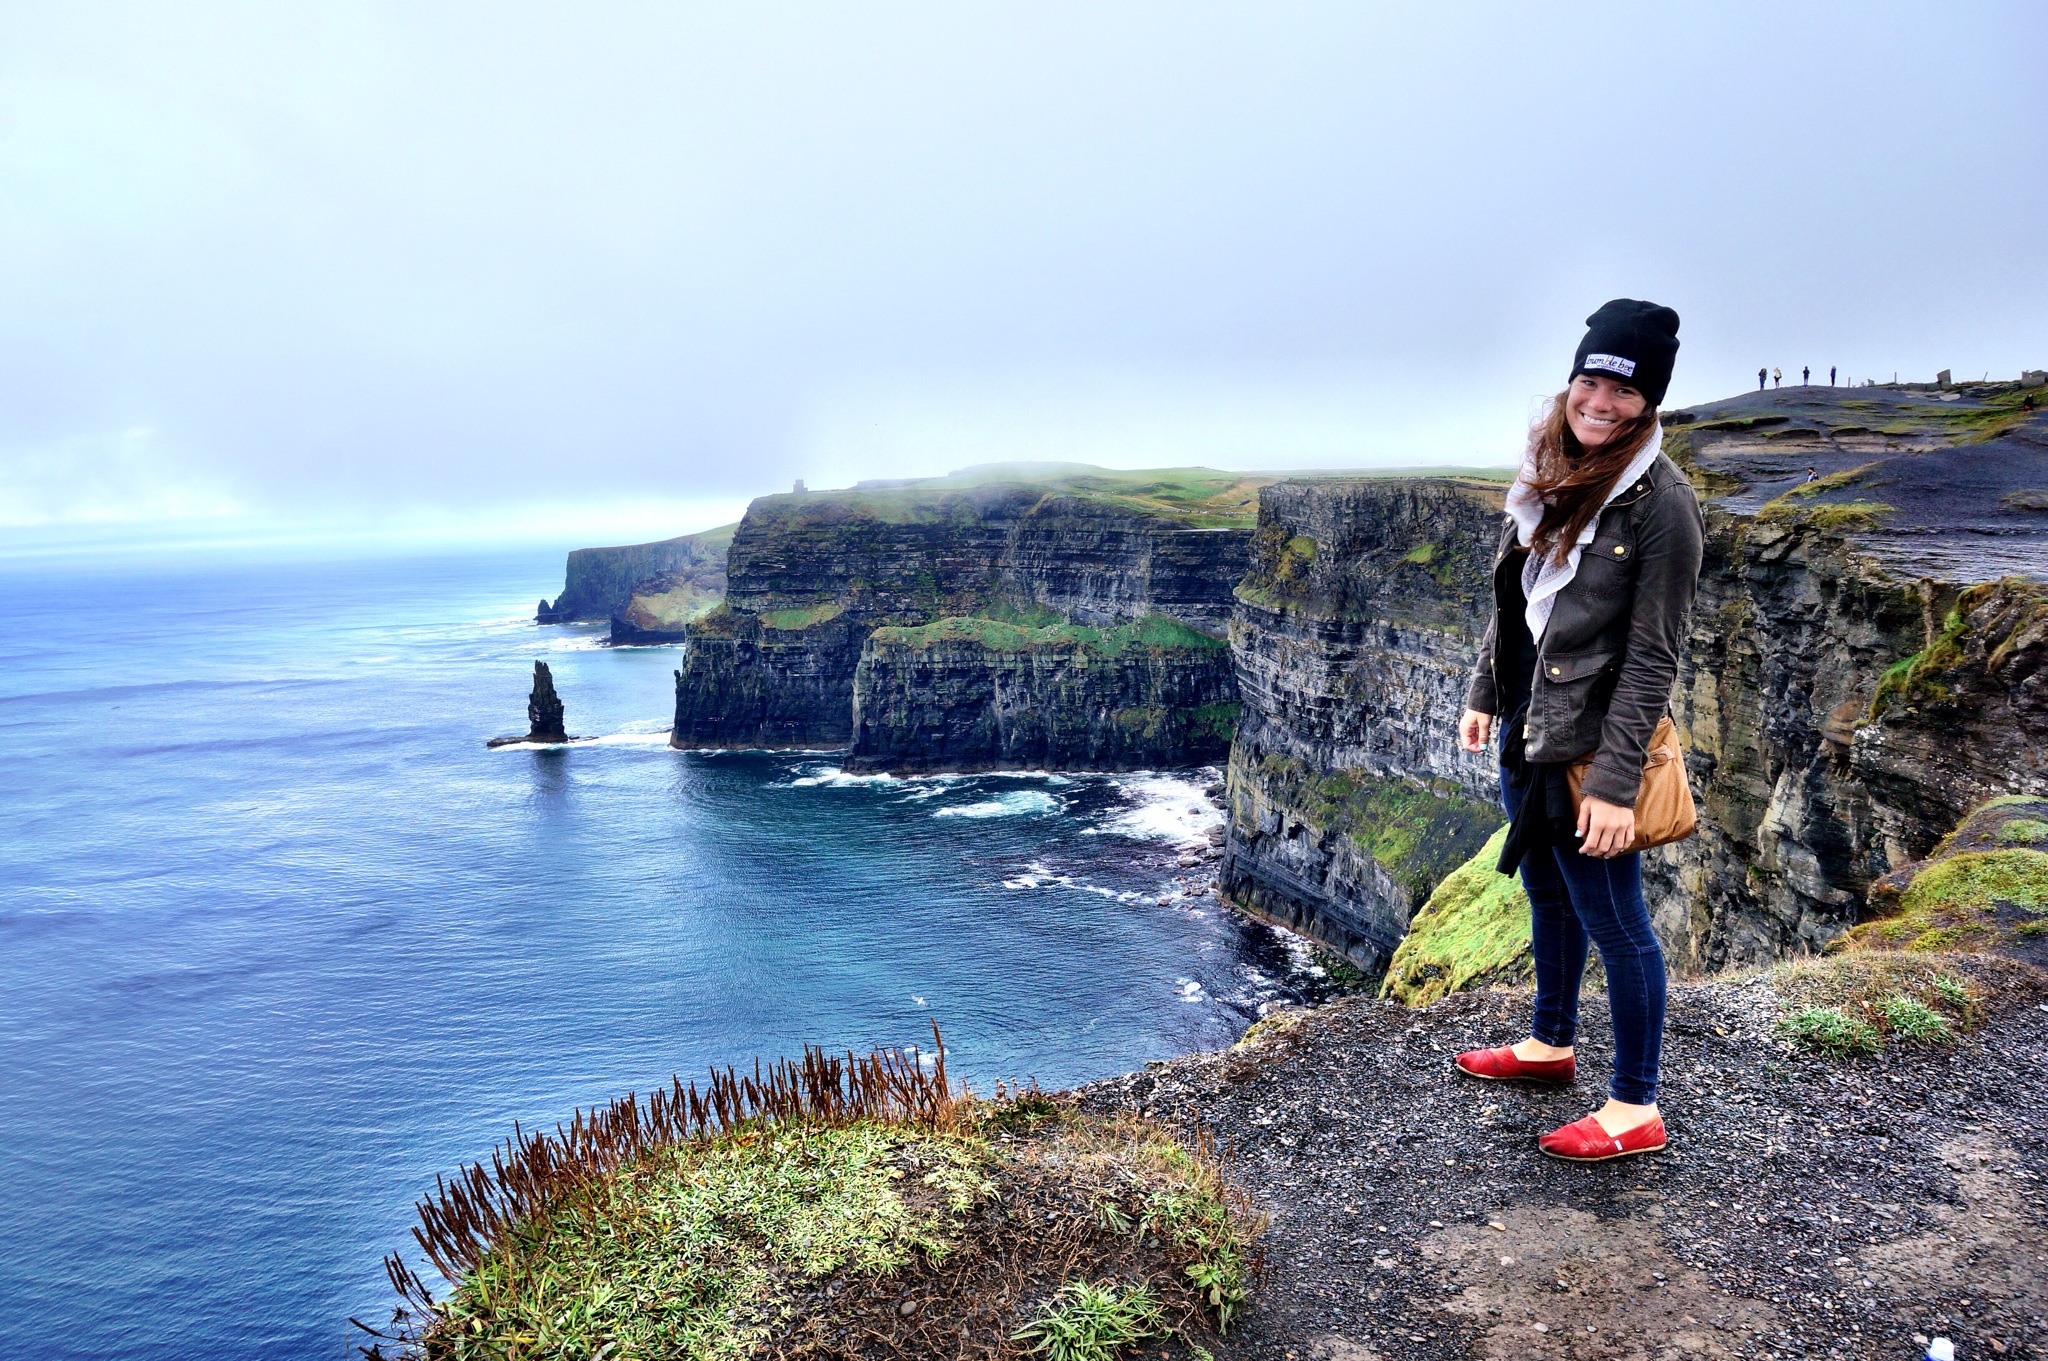 The photos of Cliffs of Moher are so absolutely jaw dropping you are crazy if you don't want to go there! Check out this guide to how to visit as a day trip from Dublin.